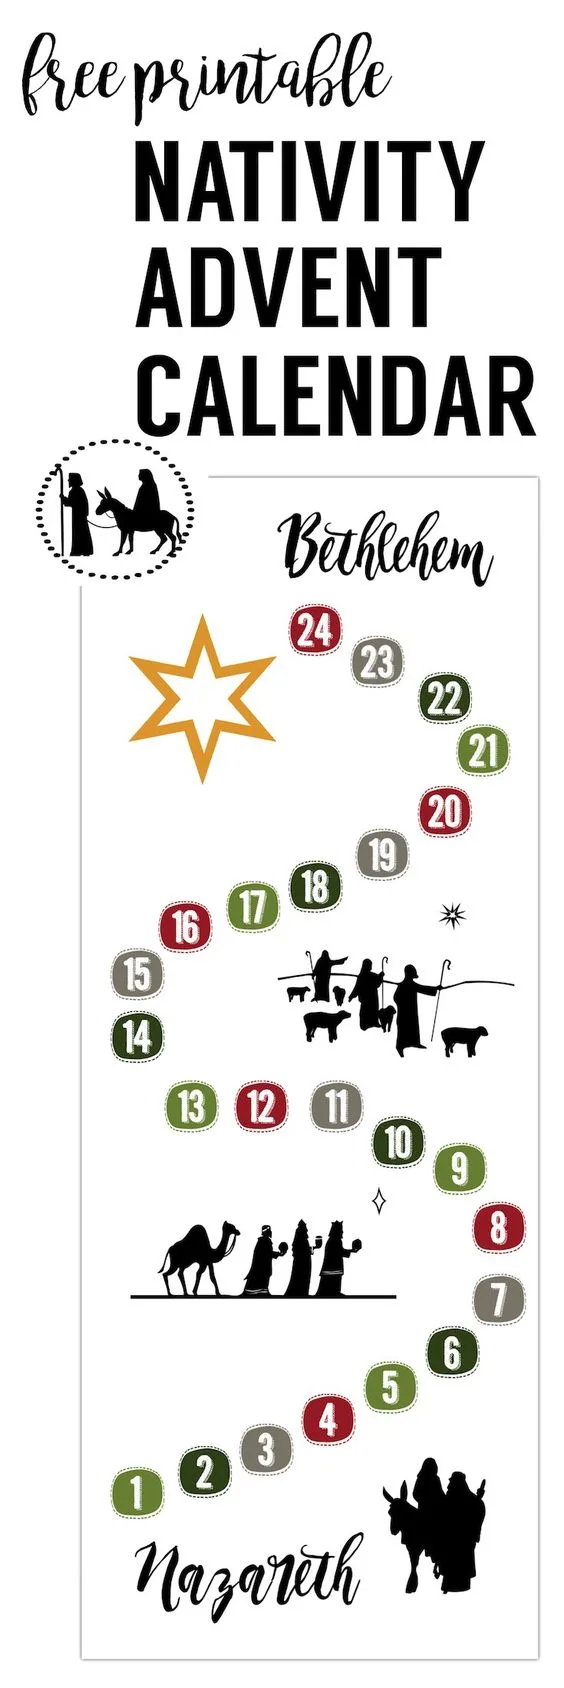 Print this Nativity Advent Calendar at home to help the kids remember the true meaning of Christmas. #DIYAdventCalendar #FreePrintable #Nativity